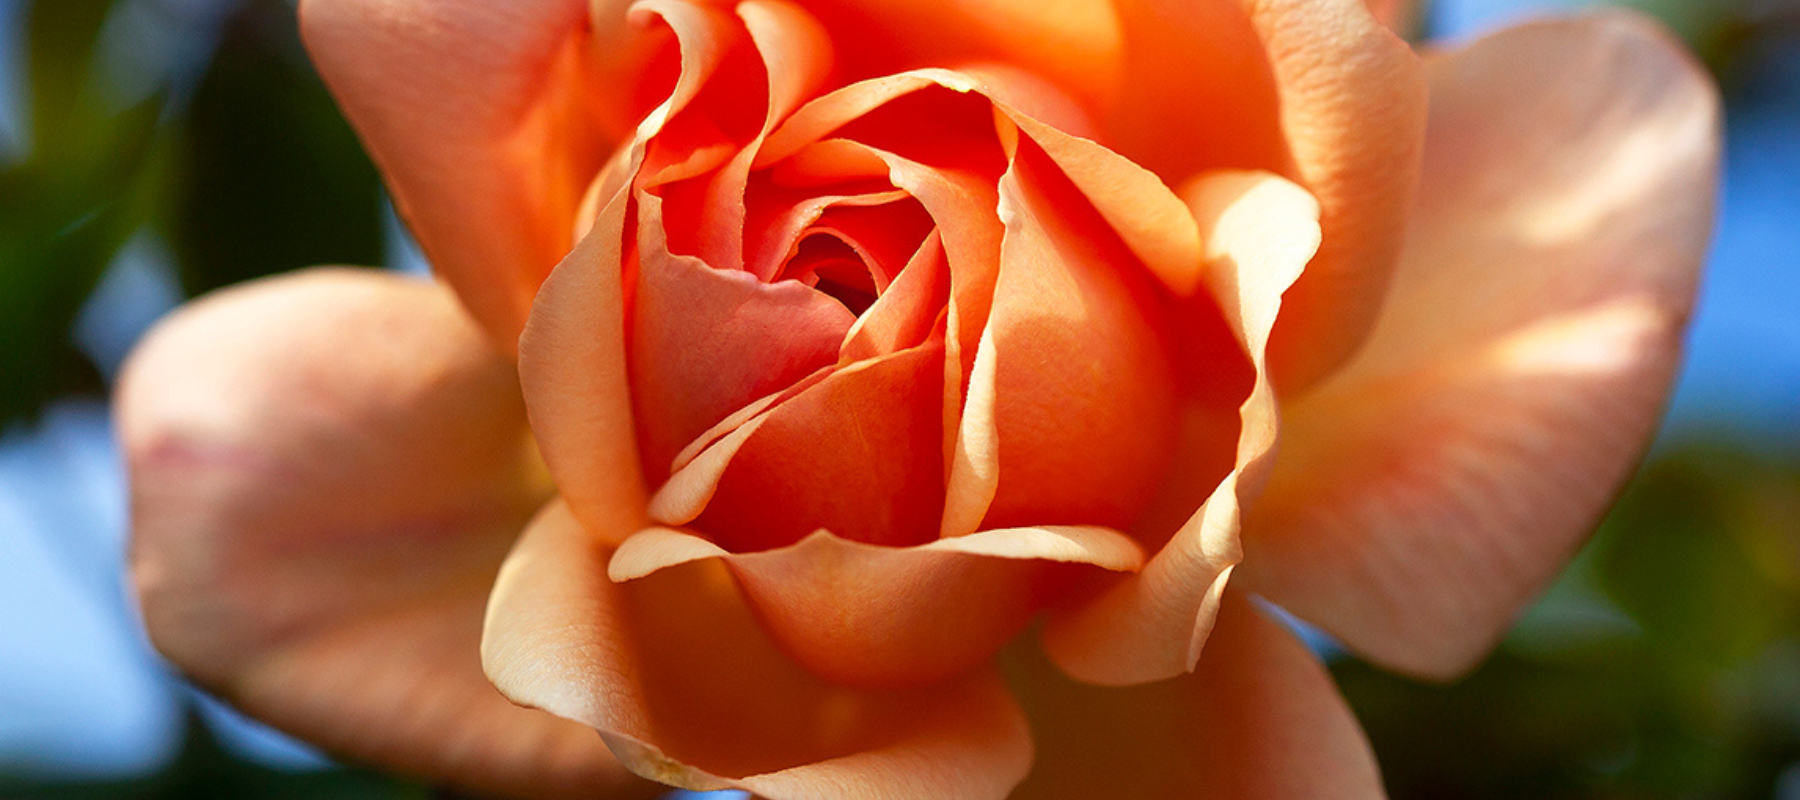 Planting Roses - Your questions answered